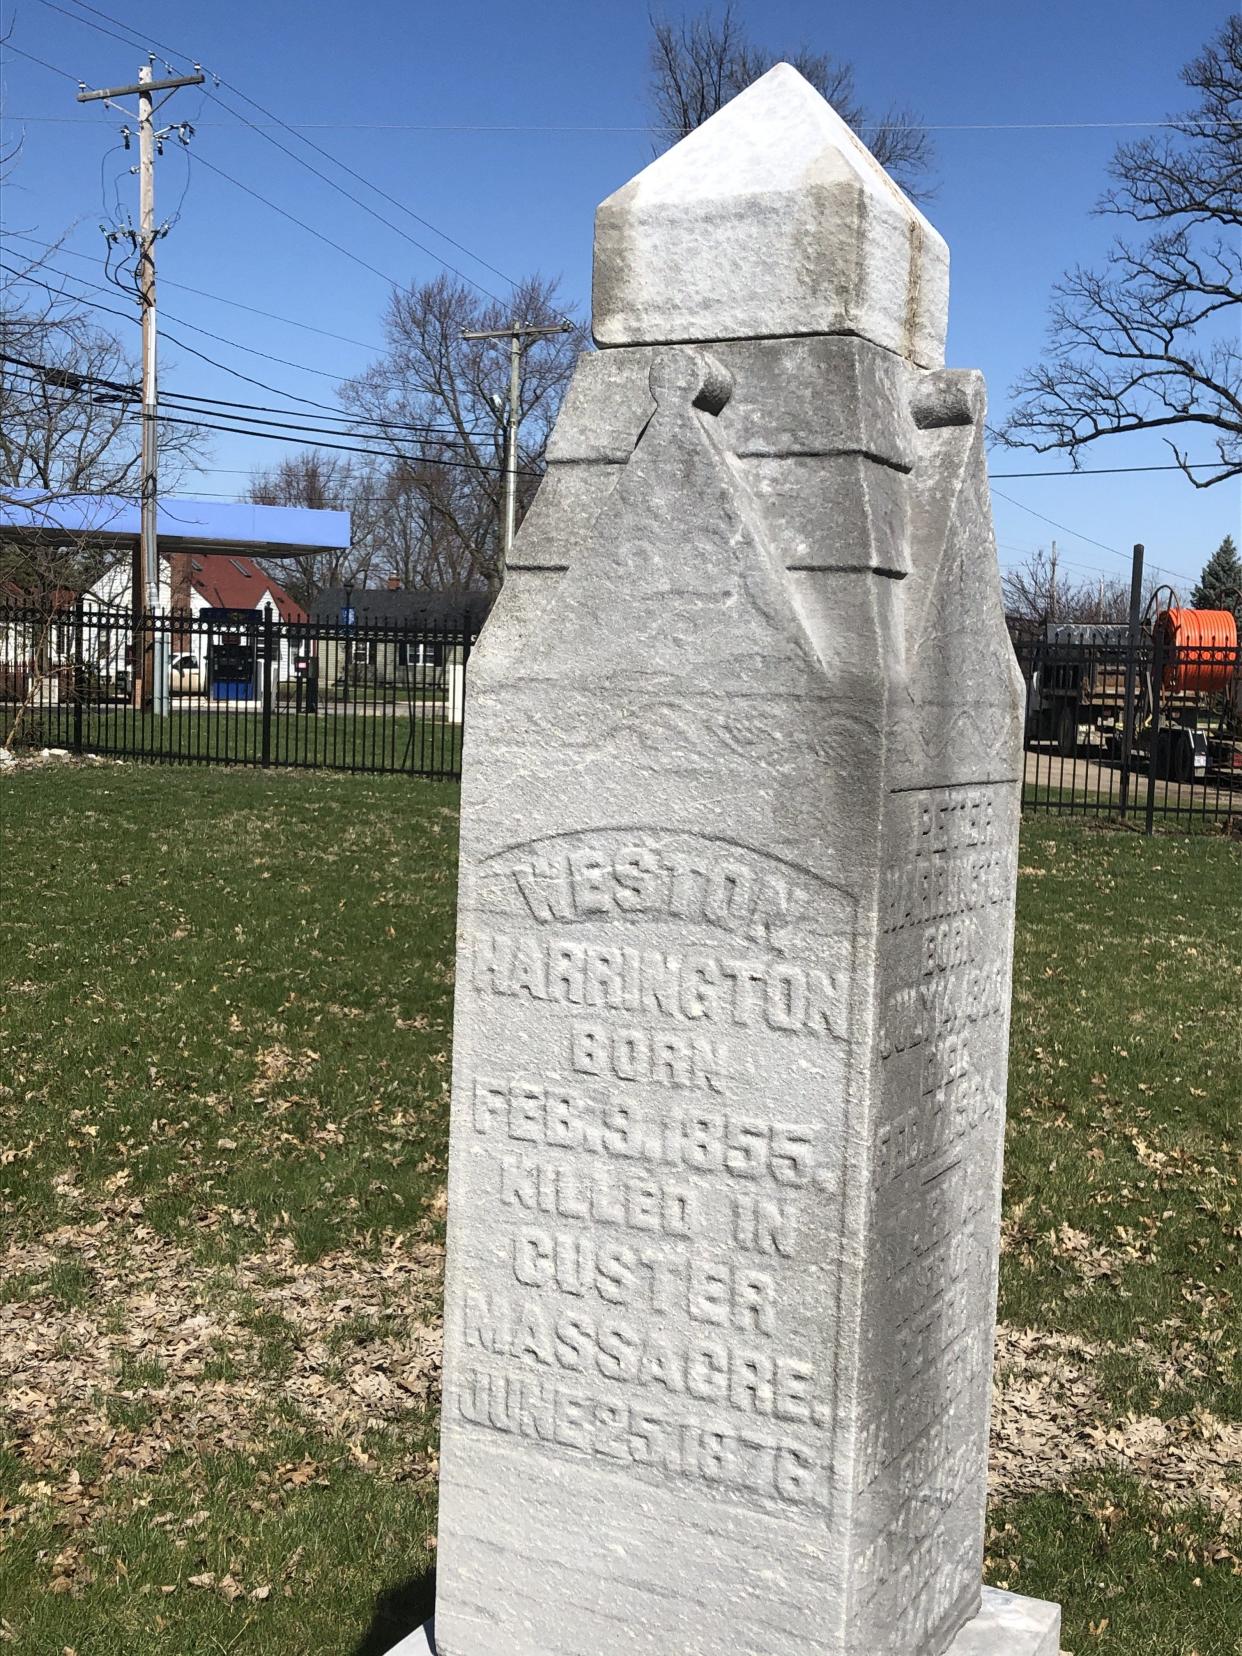 The original grave marker for Weston Harrington was moved in 2019 to Hilliard’s Historical Village in Weaver Park from Alton Cemetery in Galloway. Harrington was a member of the 7th Cavalry Regiment under the command of Lt. Col. George Armstrong Custer. The marker says he was “killed in Custer massacre” – the Battle of the Little Bighorn – on June 25, 1876.